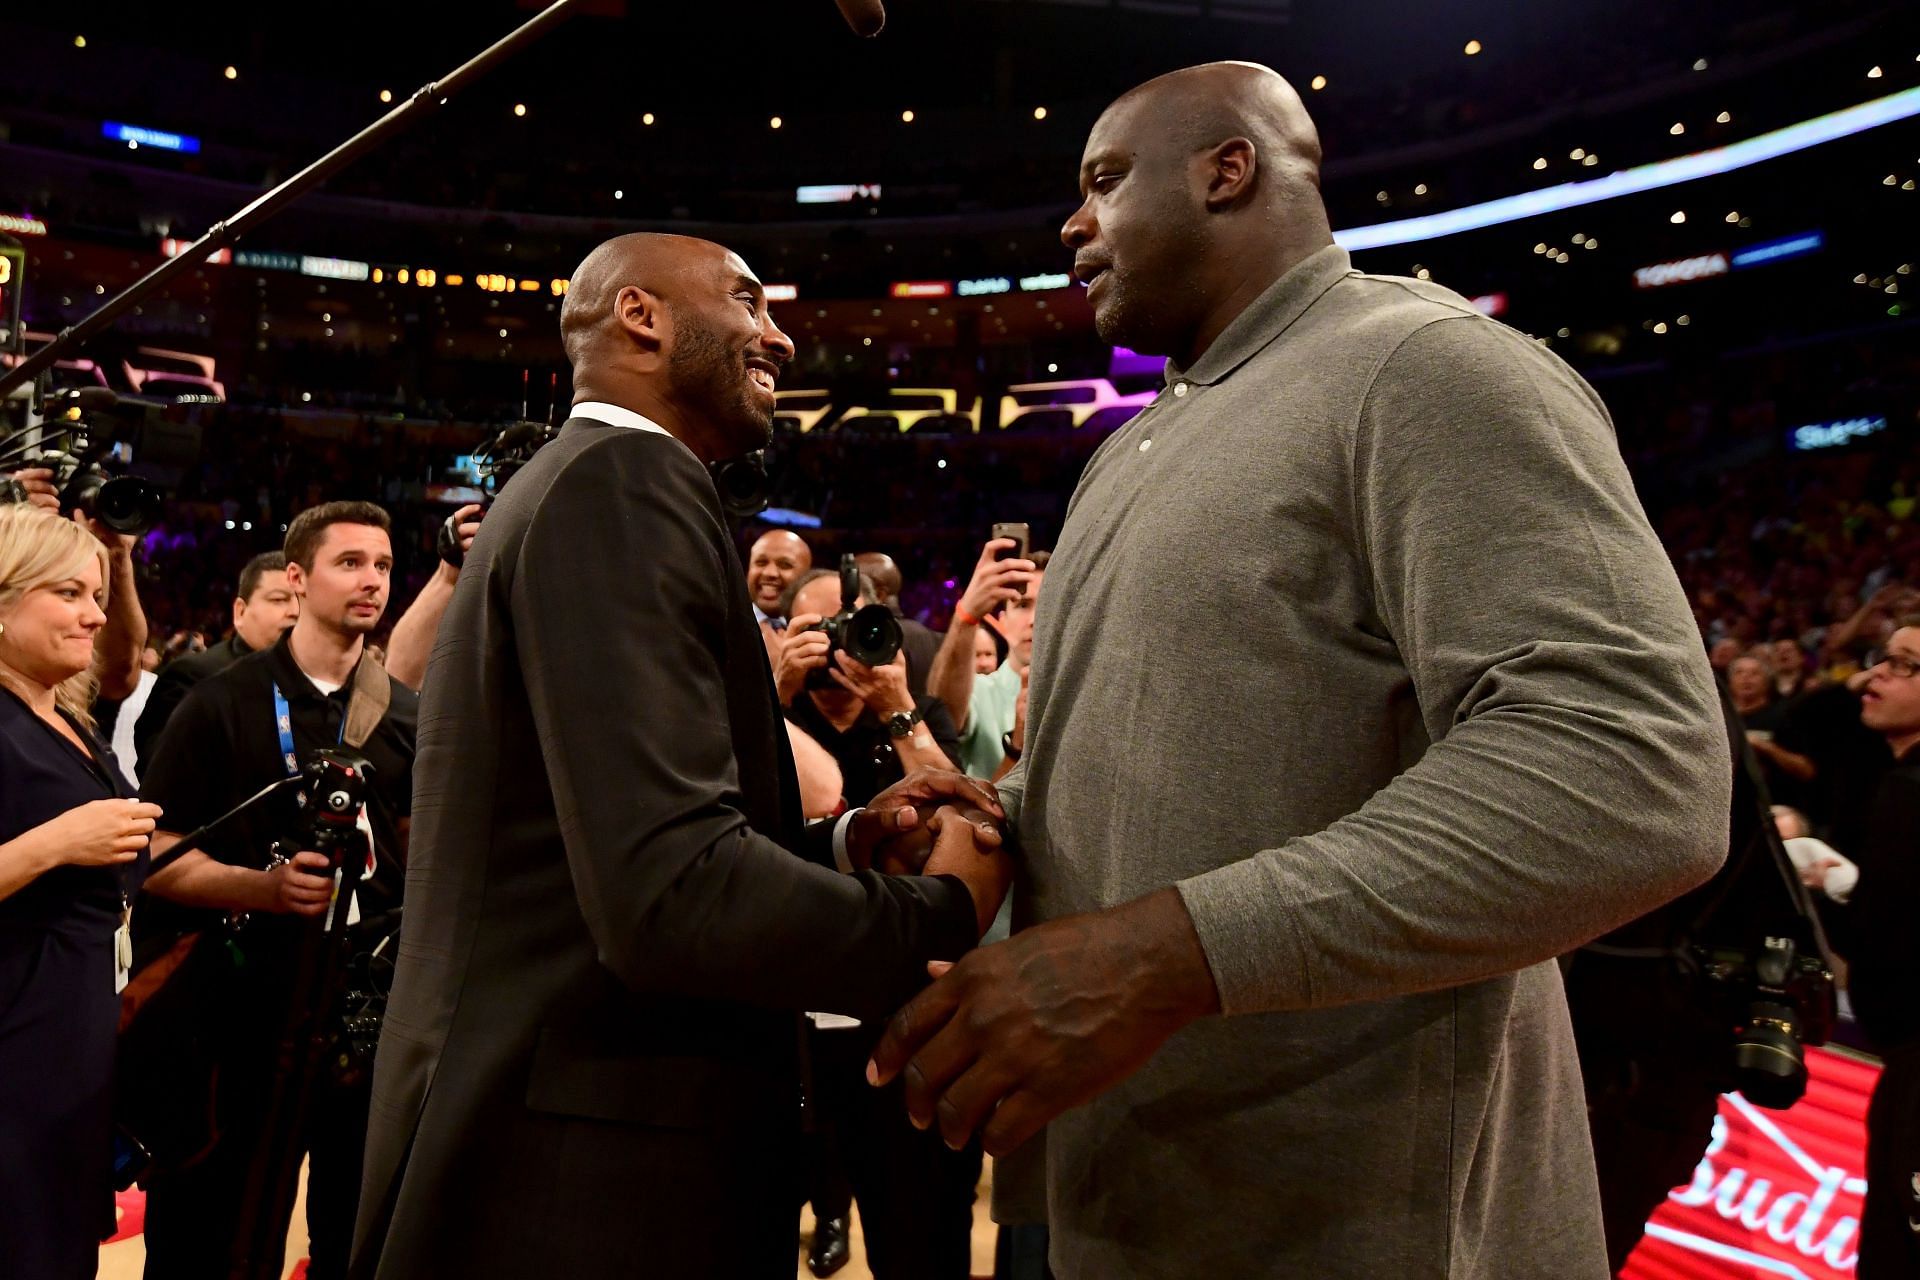 Shaq and Kobe led the LA Lakers dynasty of the early 2000s.